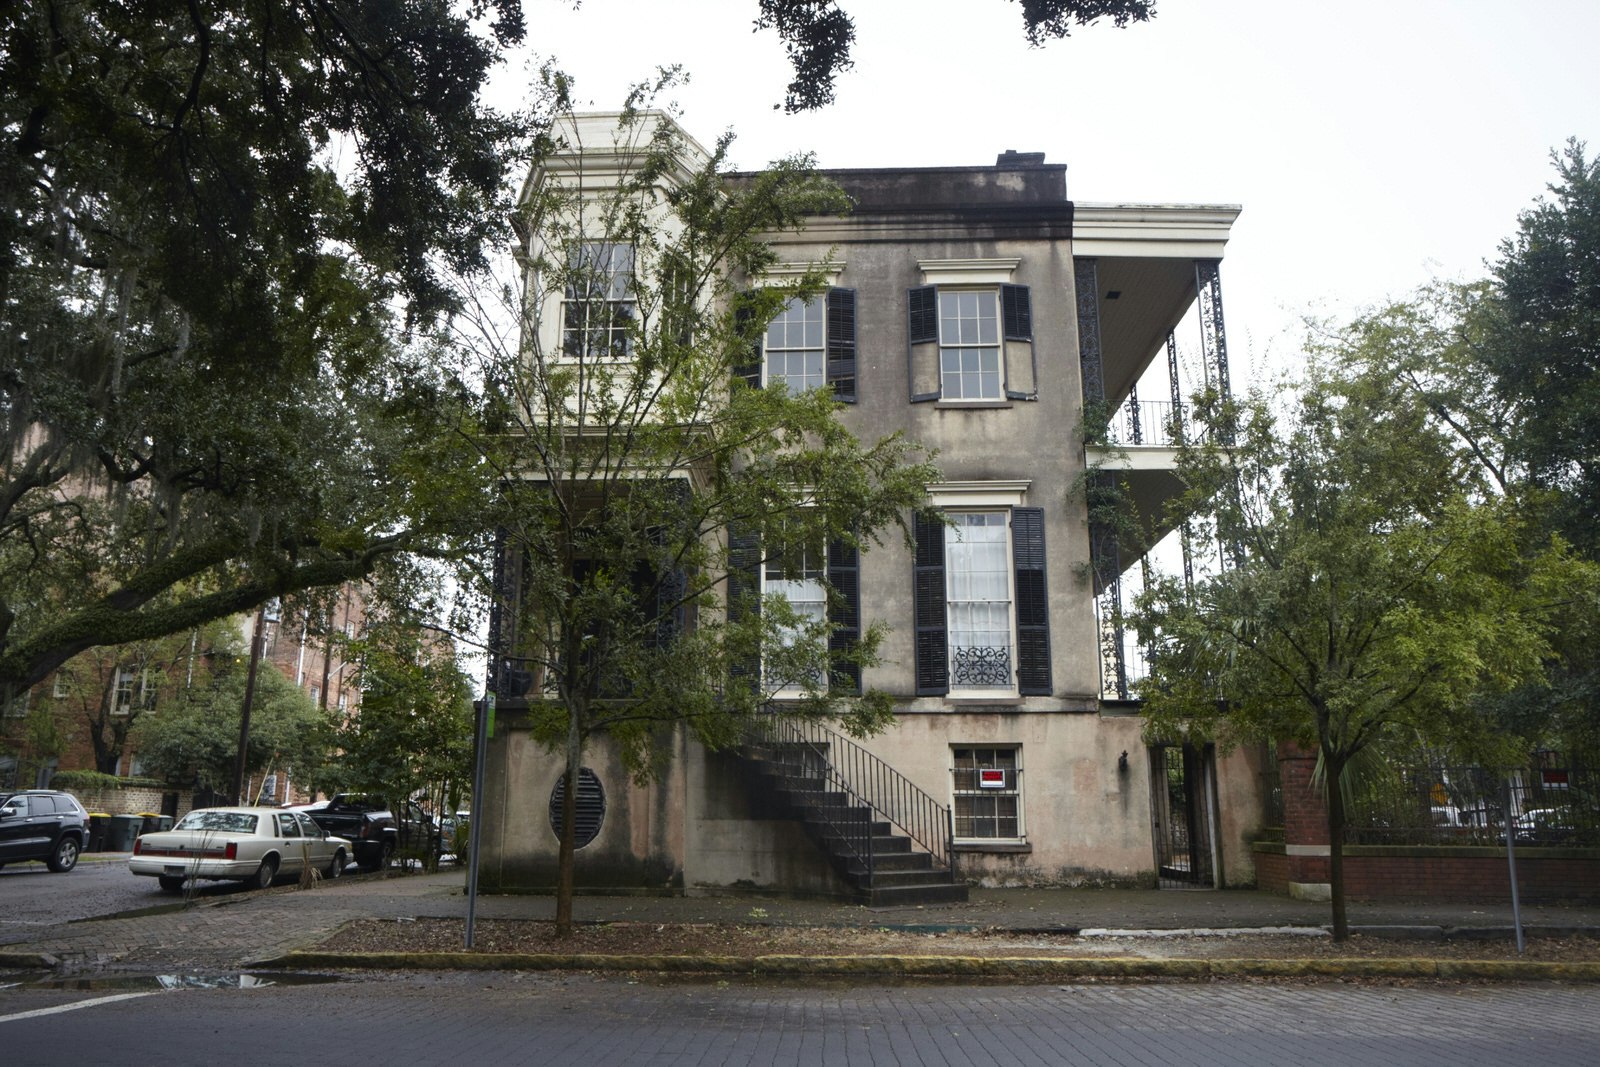 A historic house in Calhoun Square, Savannah © Andrew Montgomery / Lonely Planet